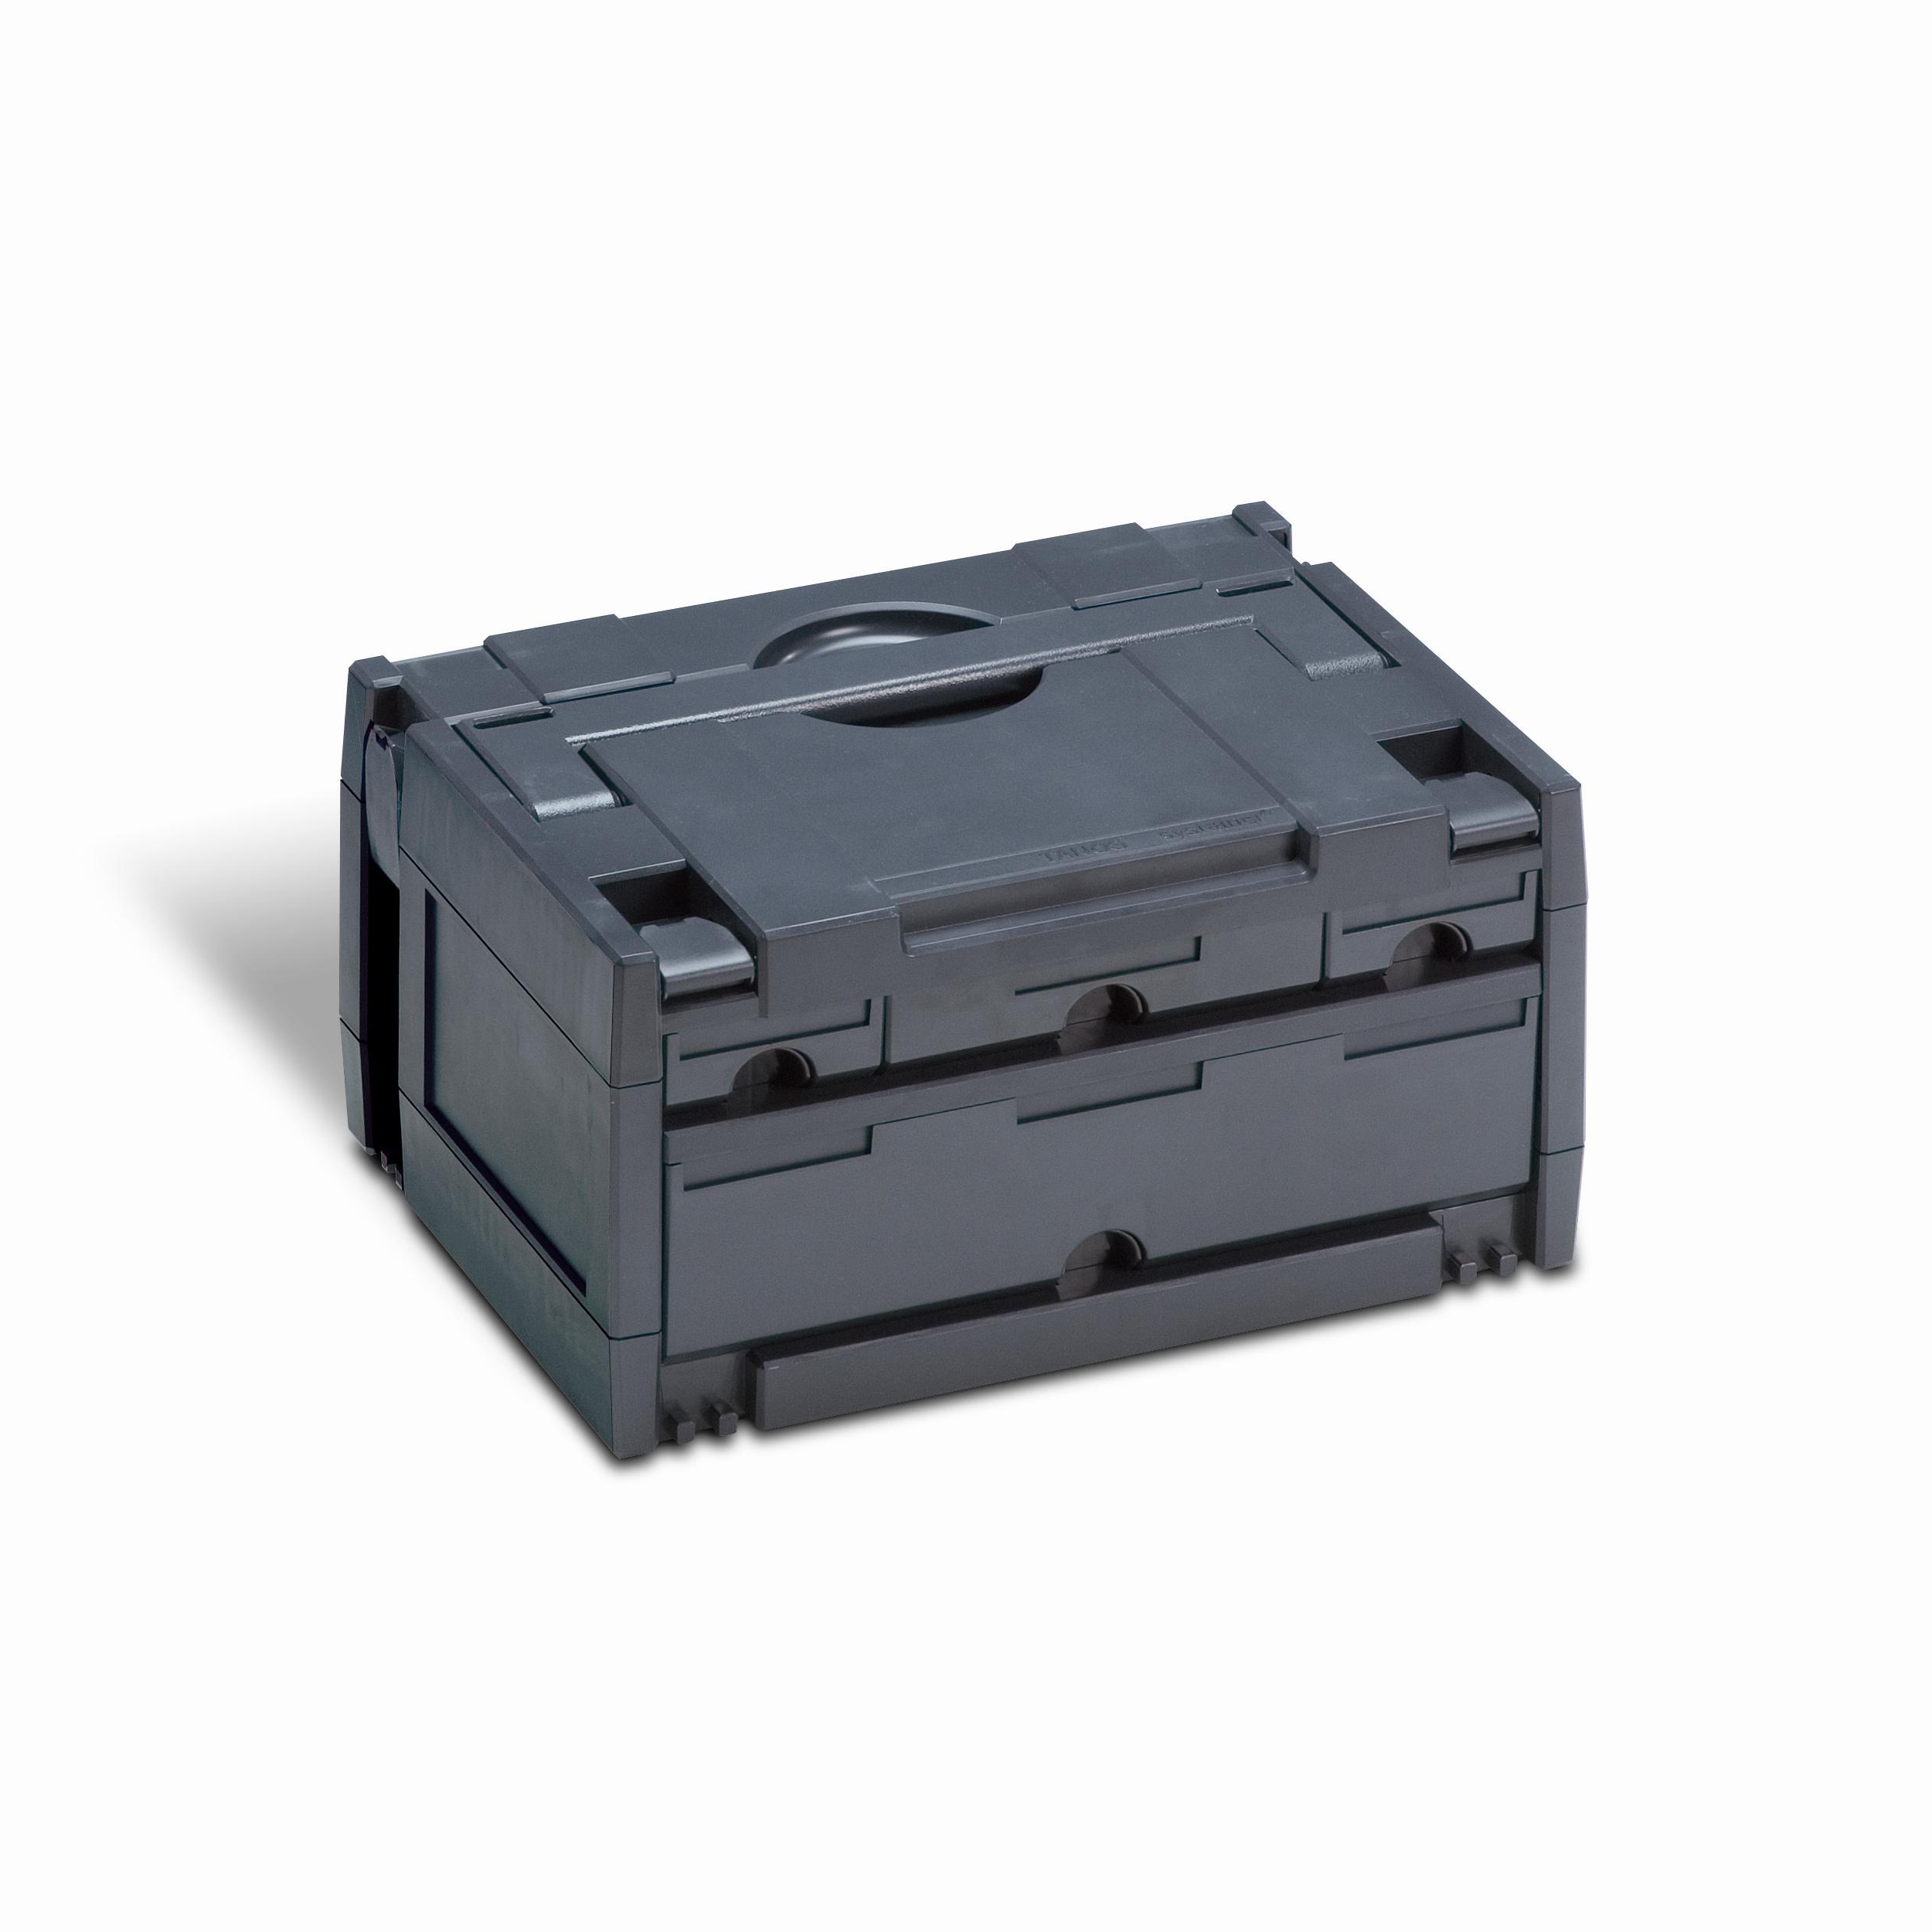 Drawer-systainer Iii - Variant 1 Anthracite